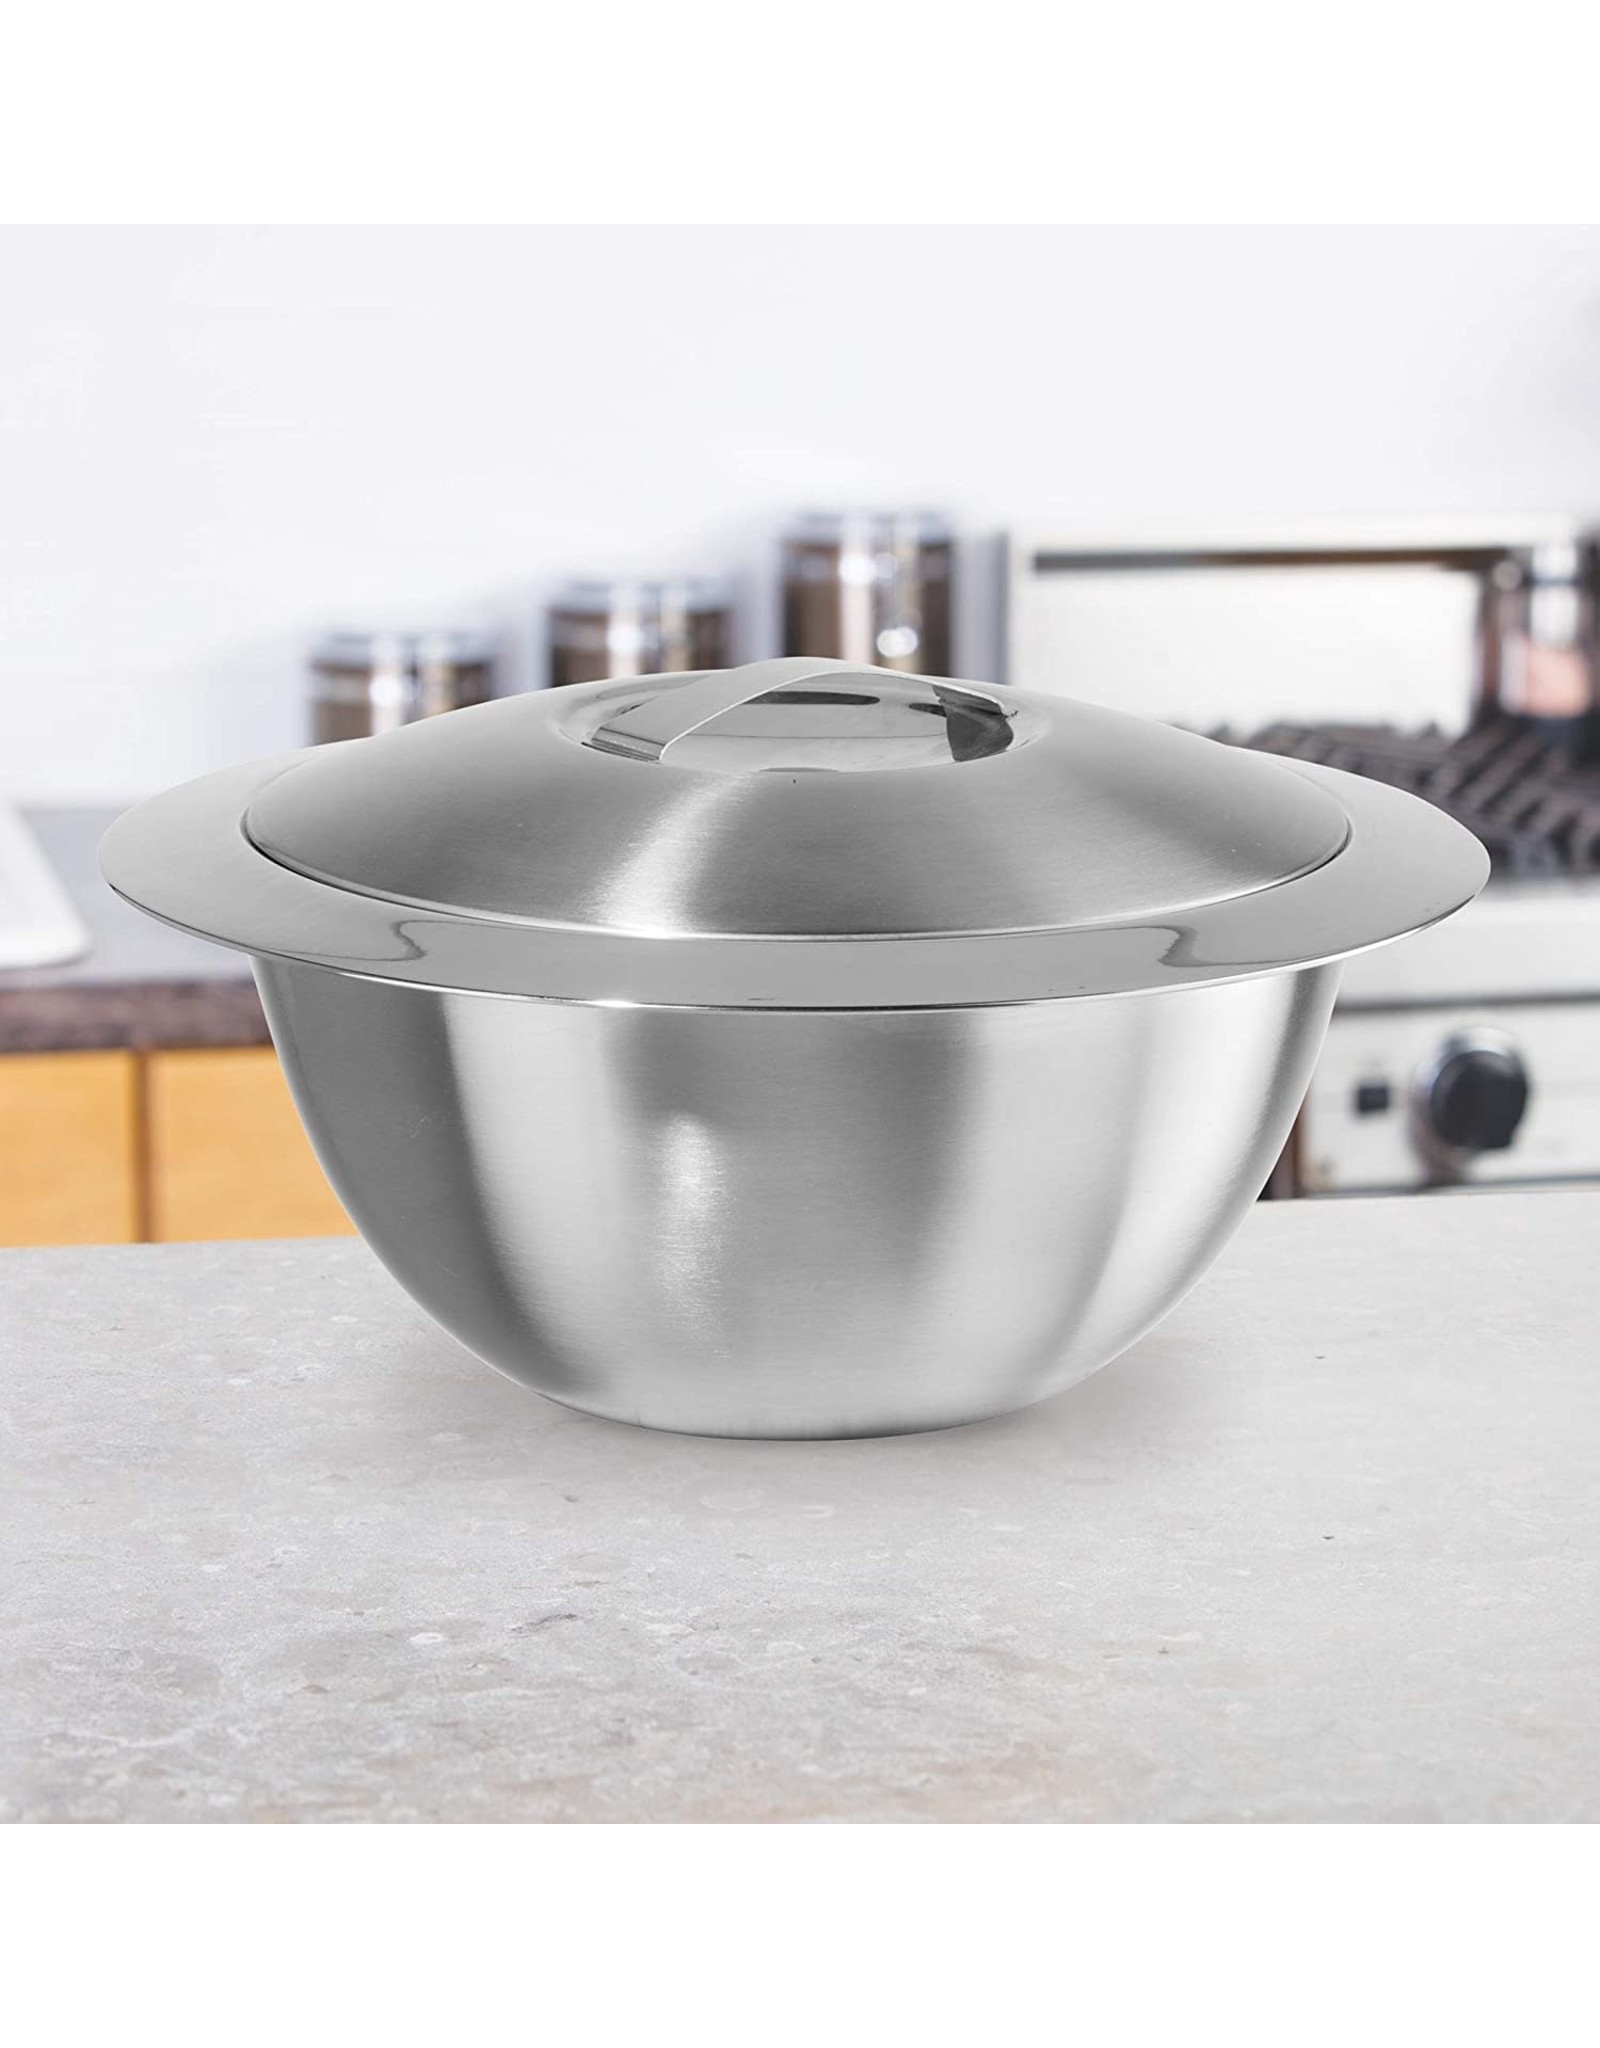 https://cdn.shoplightspeed.com/shops/635781/files/26538444/1600x2048x2/double-wall-insulated-hot-cold-serving-bowl-with-l.jpg